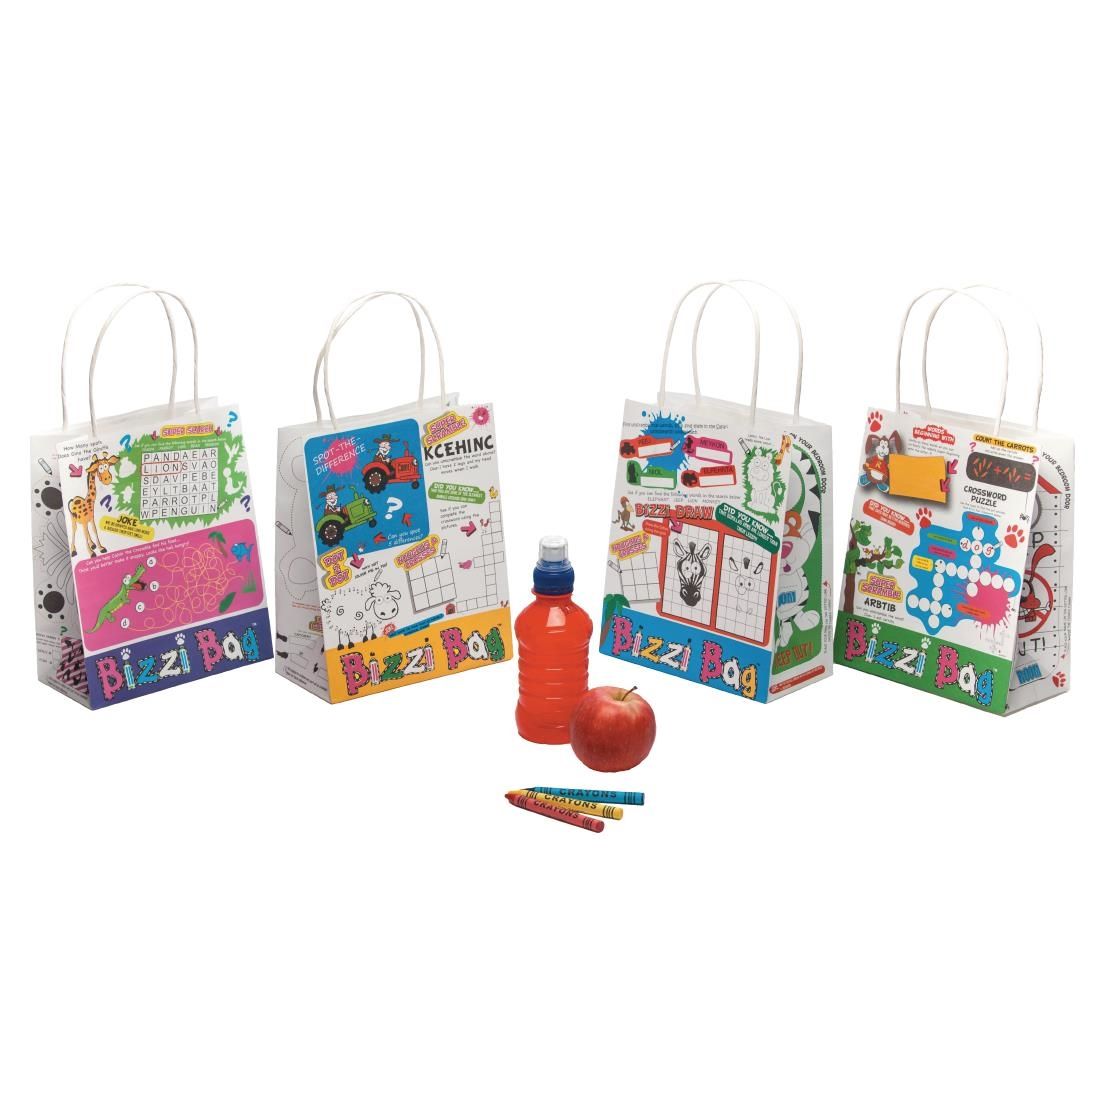 Bizzi Assorted Kids Meal Bags (Pack of 200) JD Catering Equipment Solutions Ltd